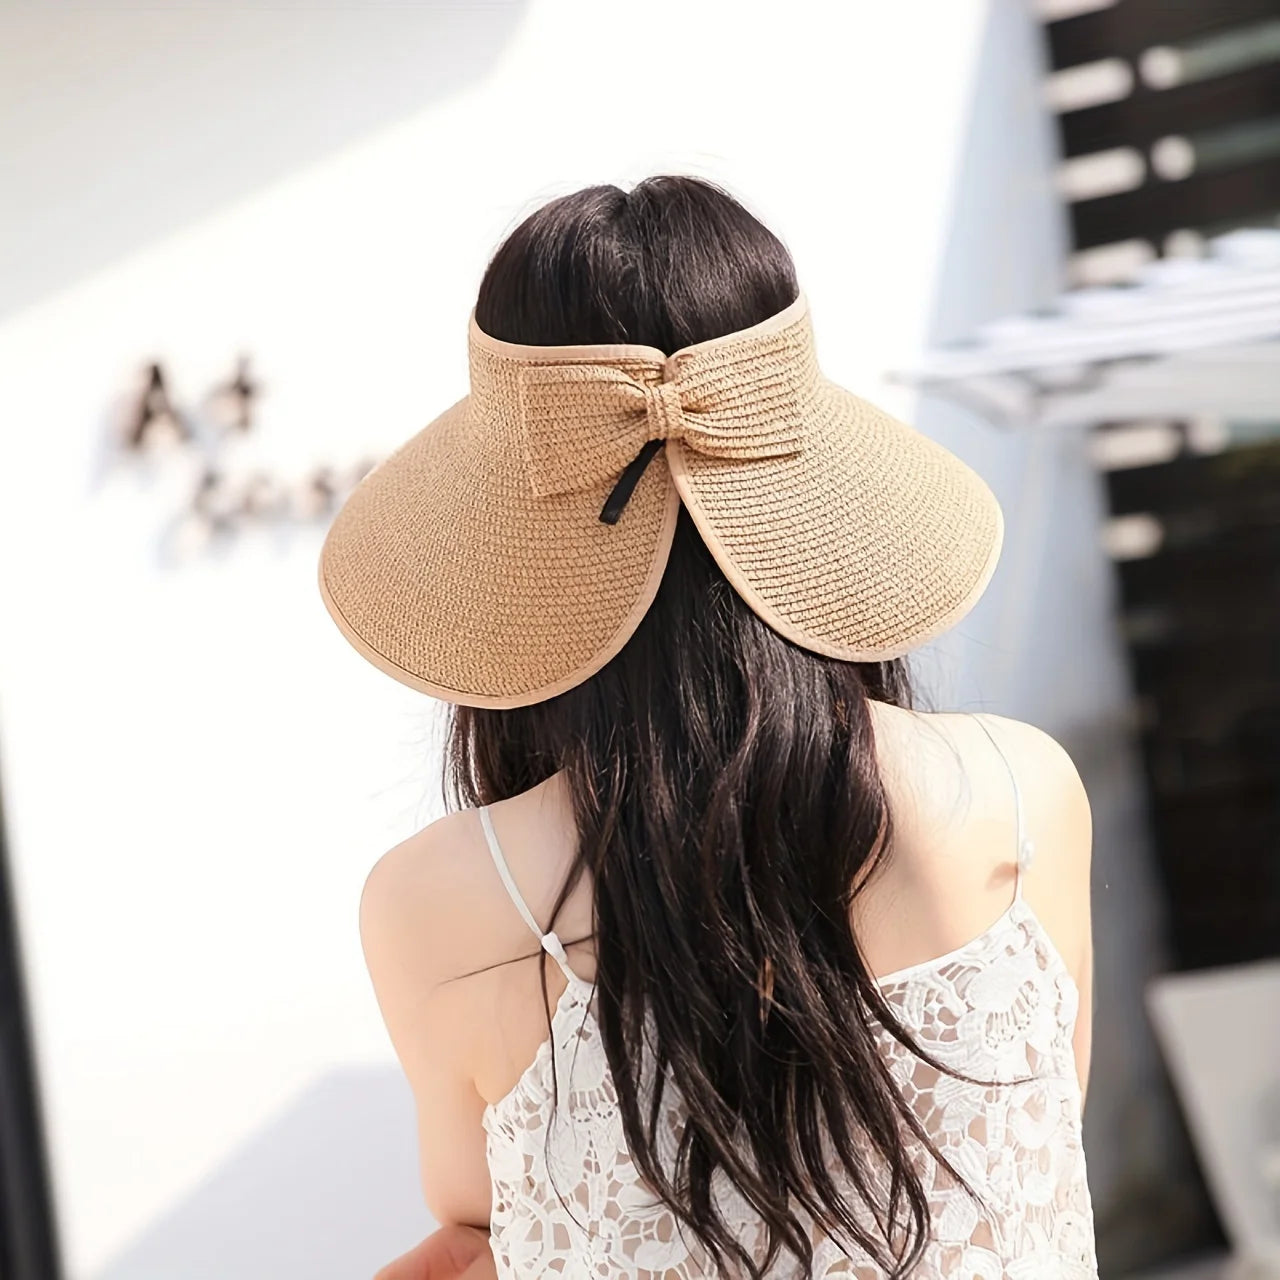 Women Summer Visors Hat Hat - Stylish and UV-Resistant for Outdoor HikingFoldable Sun Cap Wide Large Brim Beach Straw Hats Chape